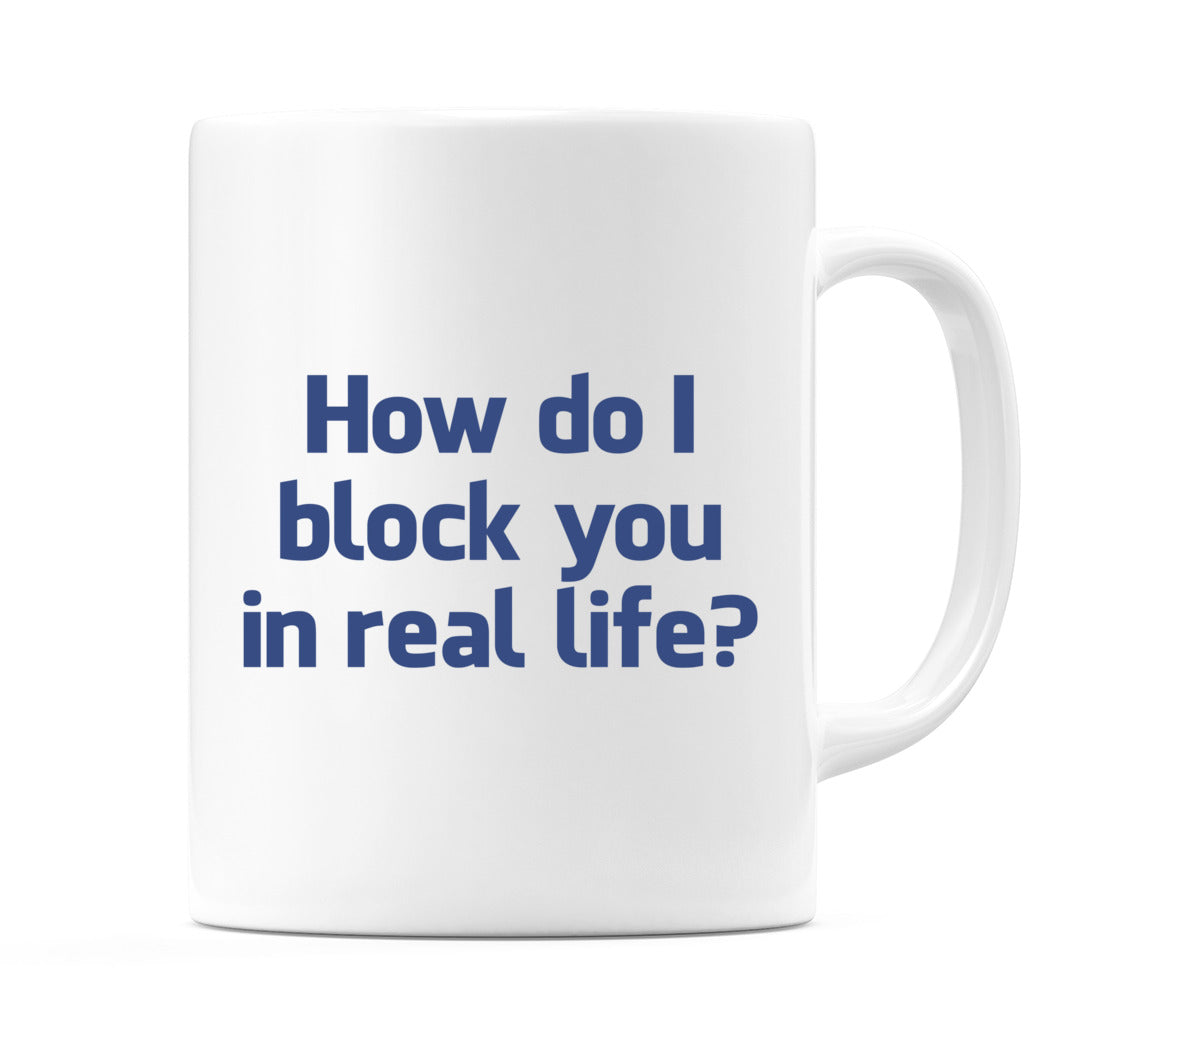 How do I block you in real life? Mug